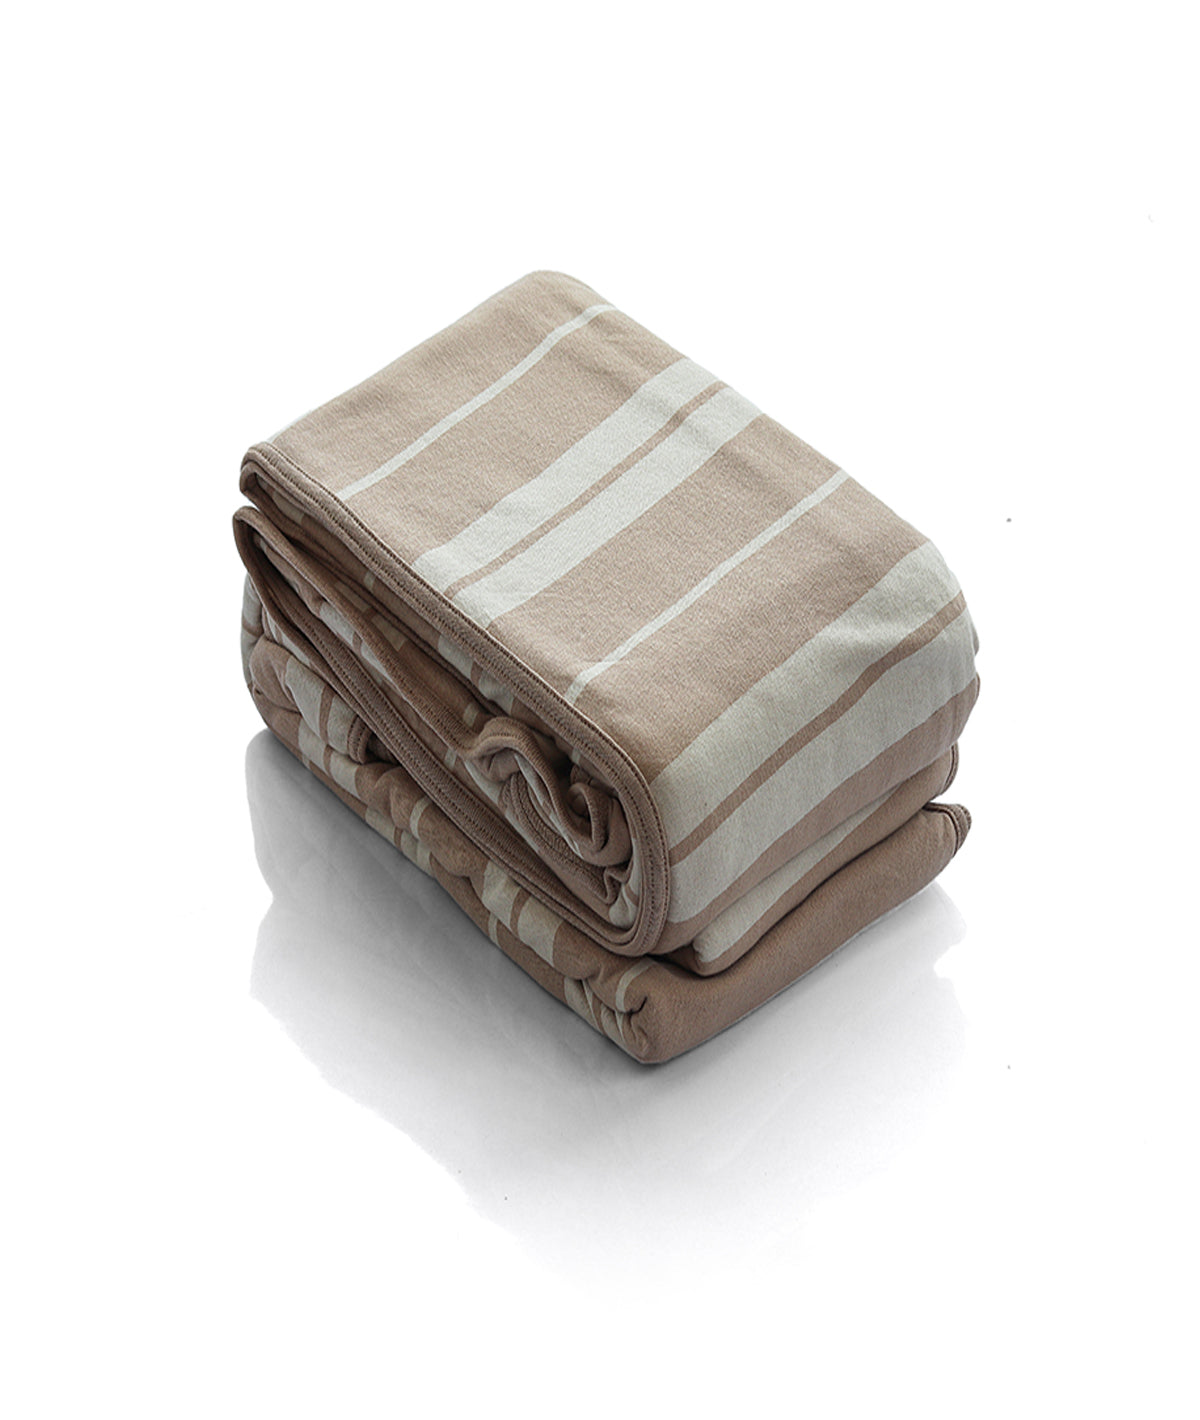 Wide Stripe Cotton Knitted Double Bed AC Blanket / Dohar For Round The Year Use (Natural & Linen)